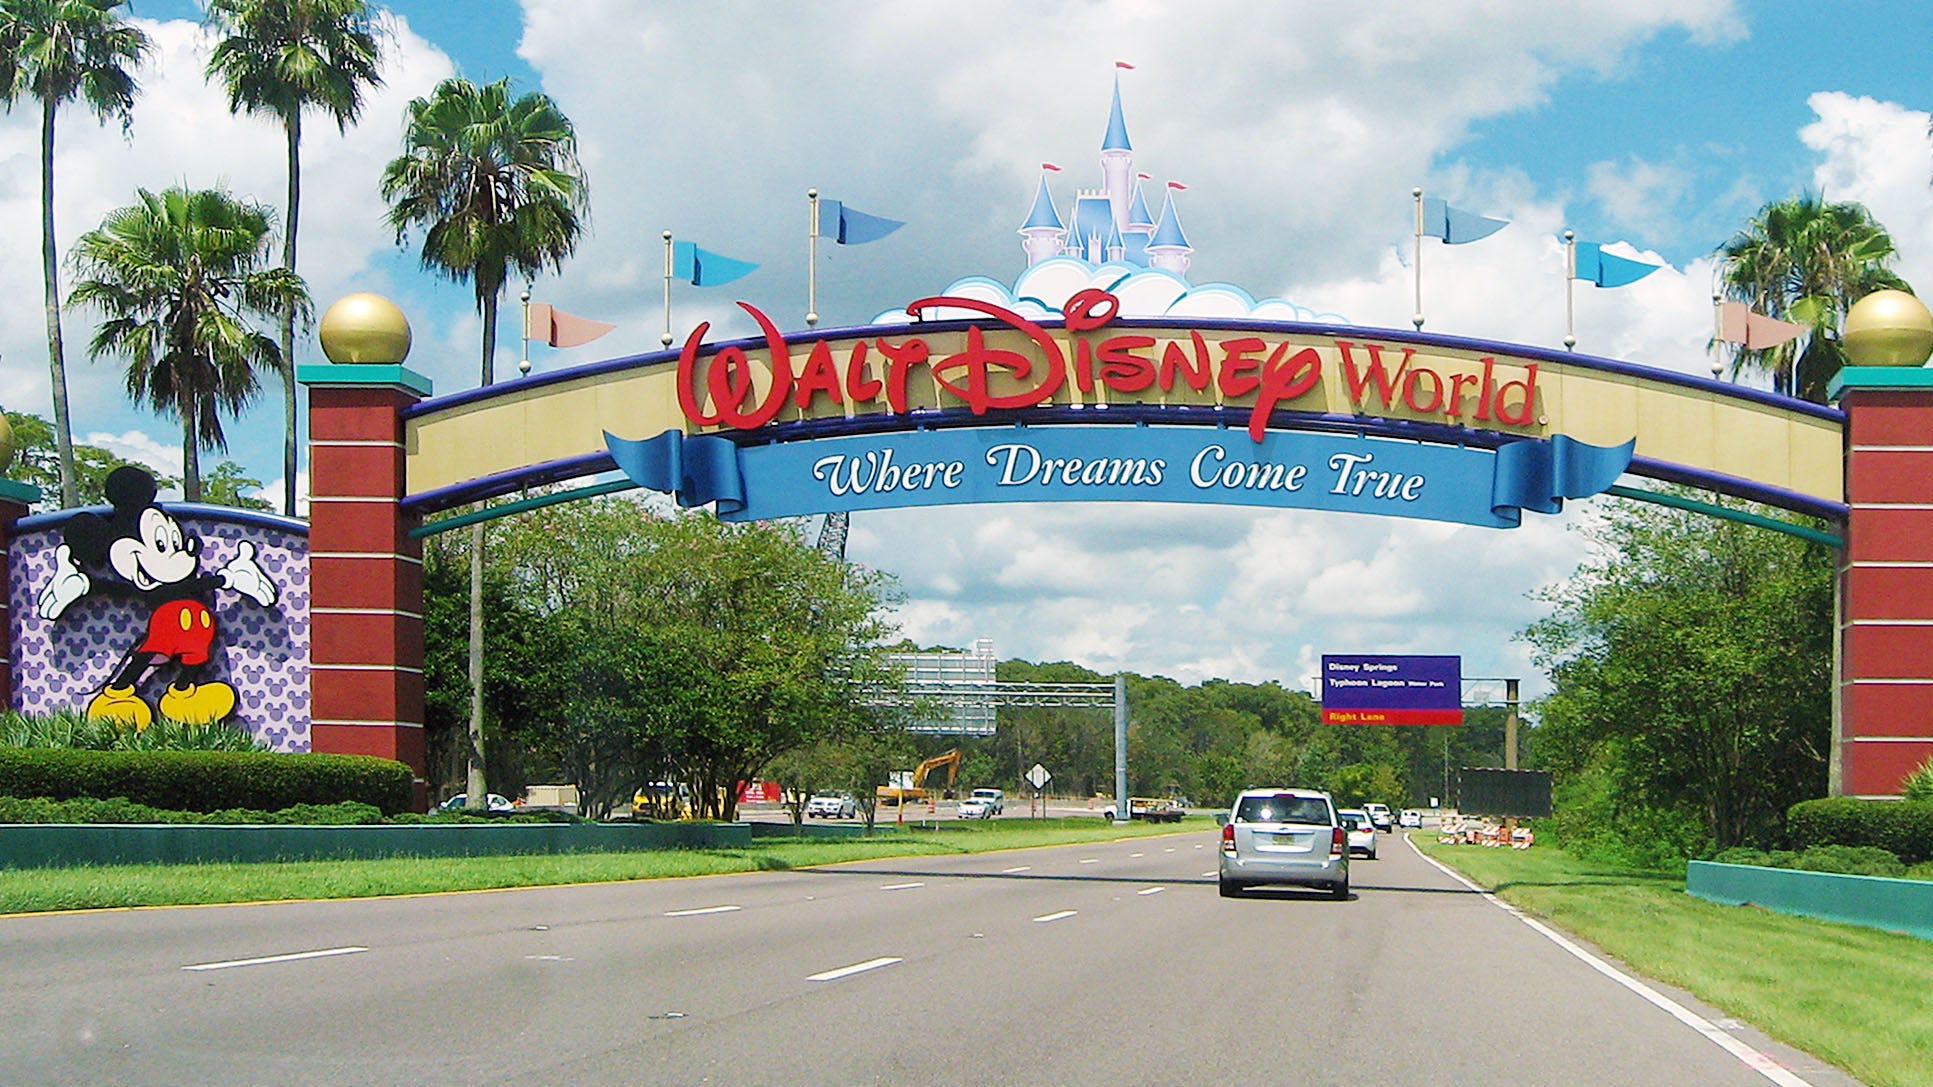 Disney World announces mobile app that will serve as MagicBand wristband